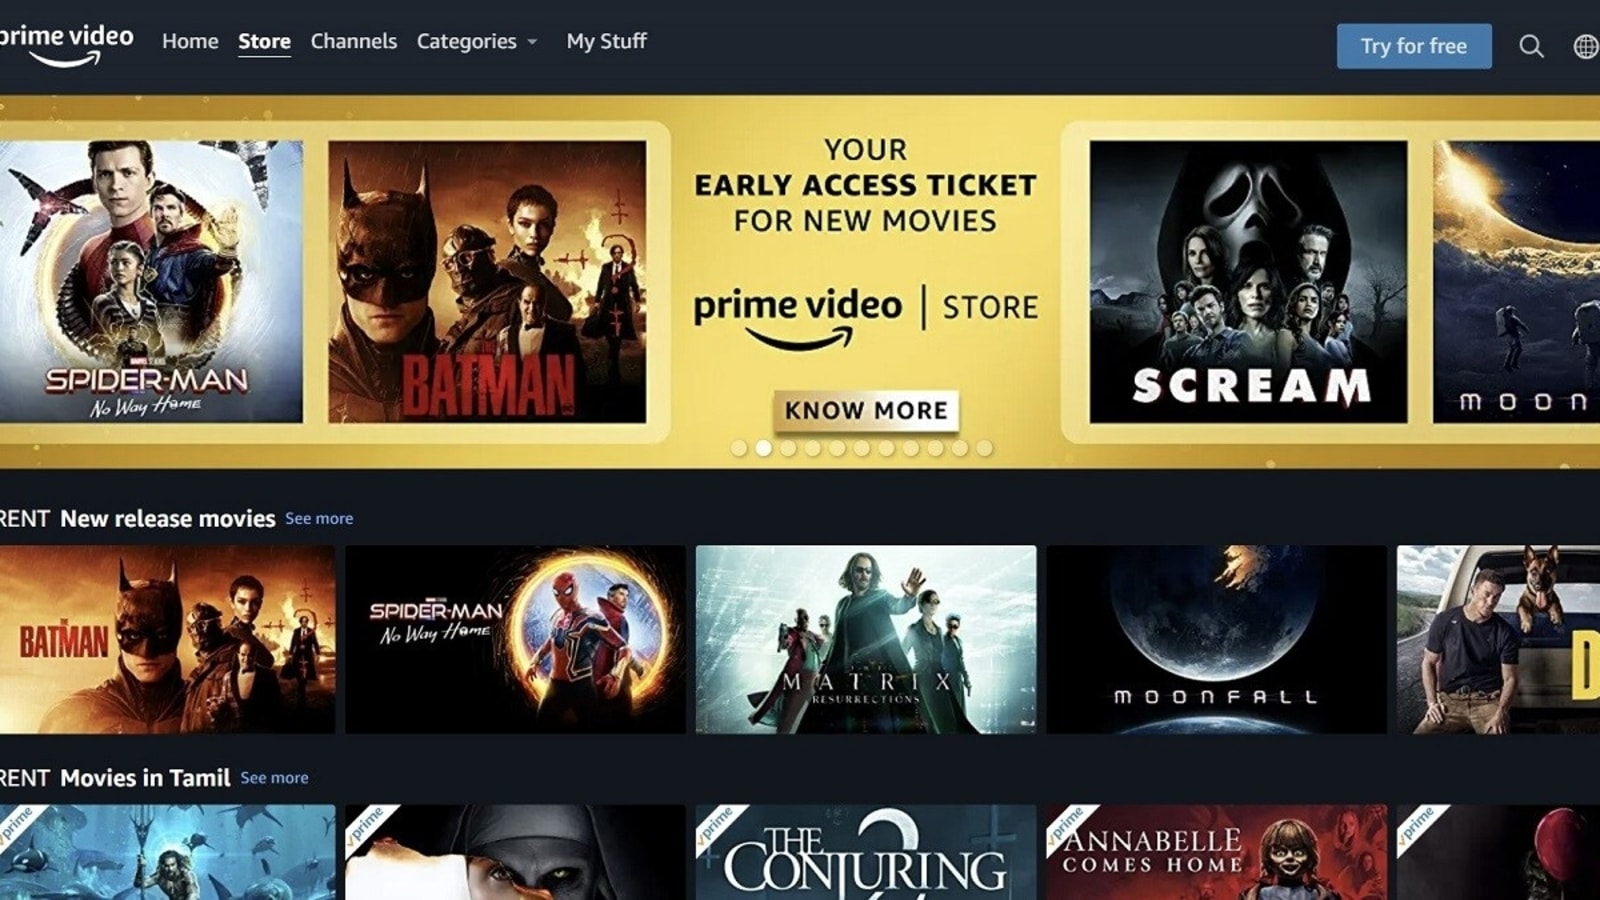 Spider-Man No Way Home, The Batman on Amazon Prime Video in India! But you have to RENT it Tech News